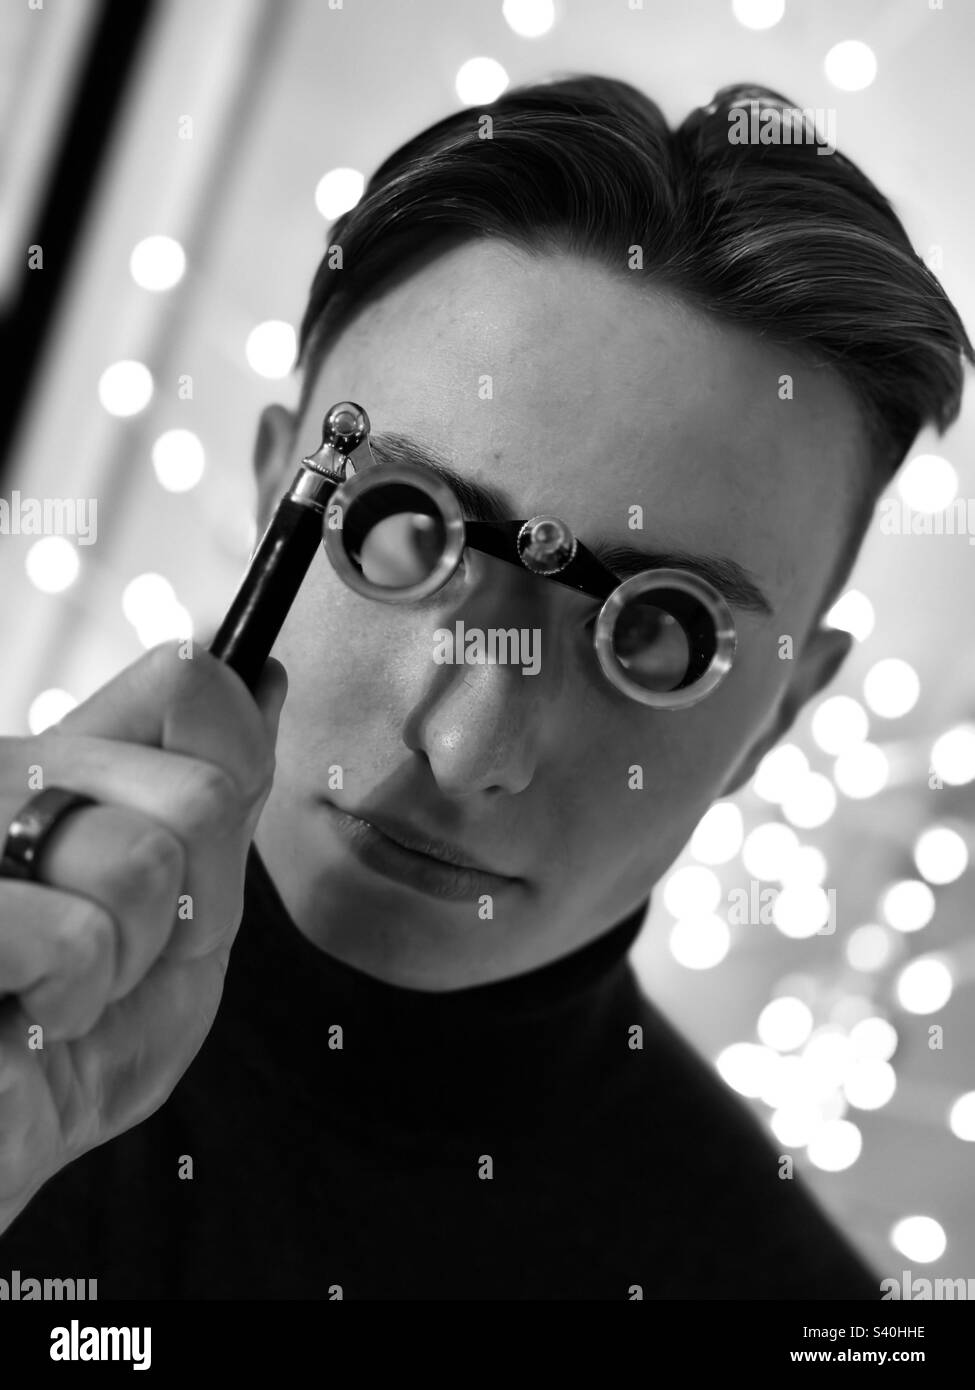 Majestic Man with Theatre Glasses Staring into Camera with Light Bokeh in Background Stock Photo